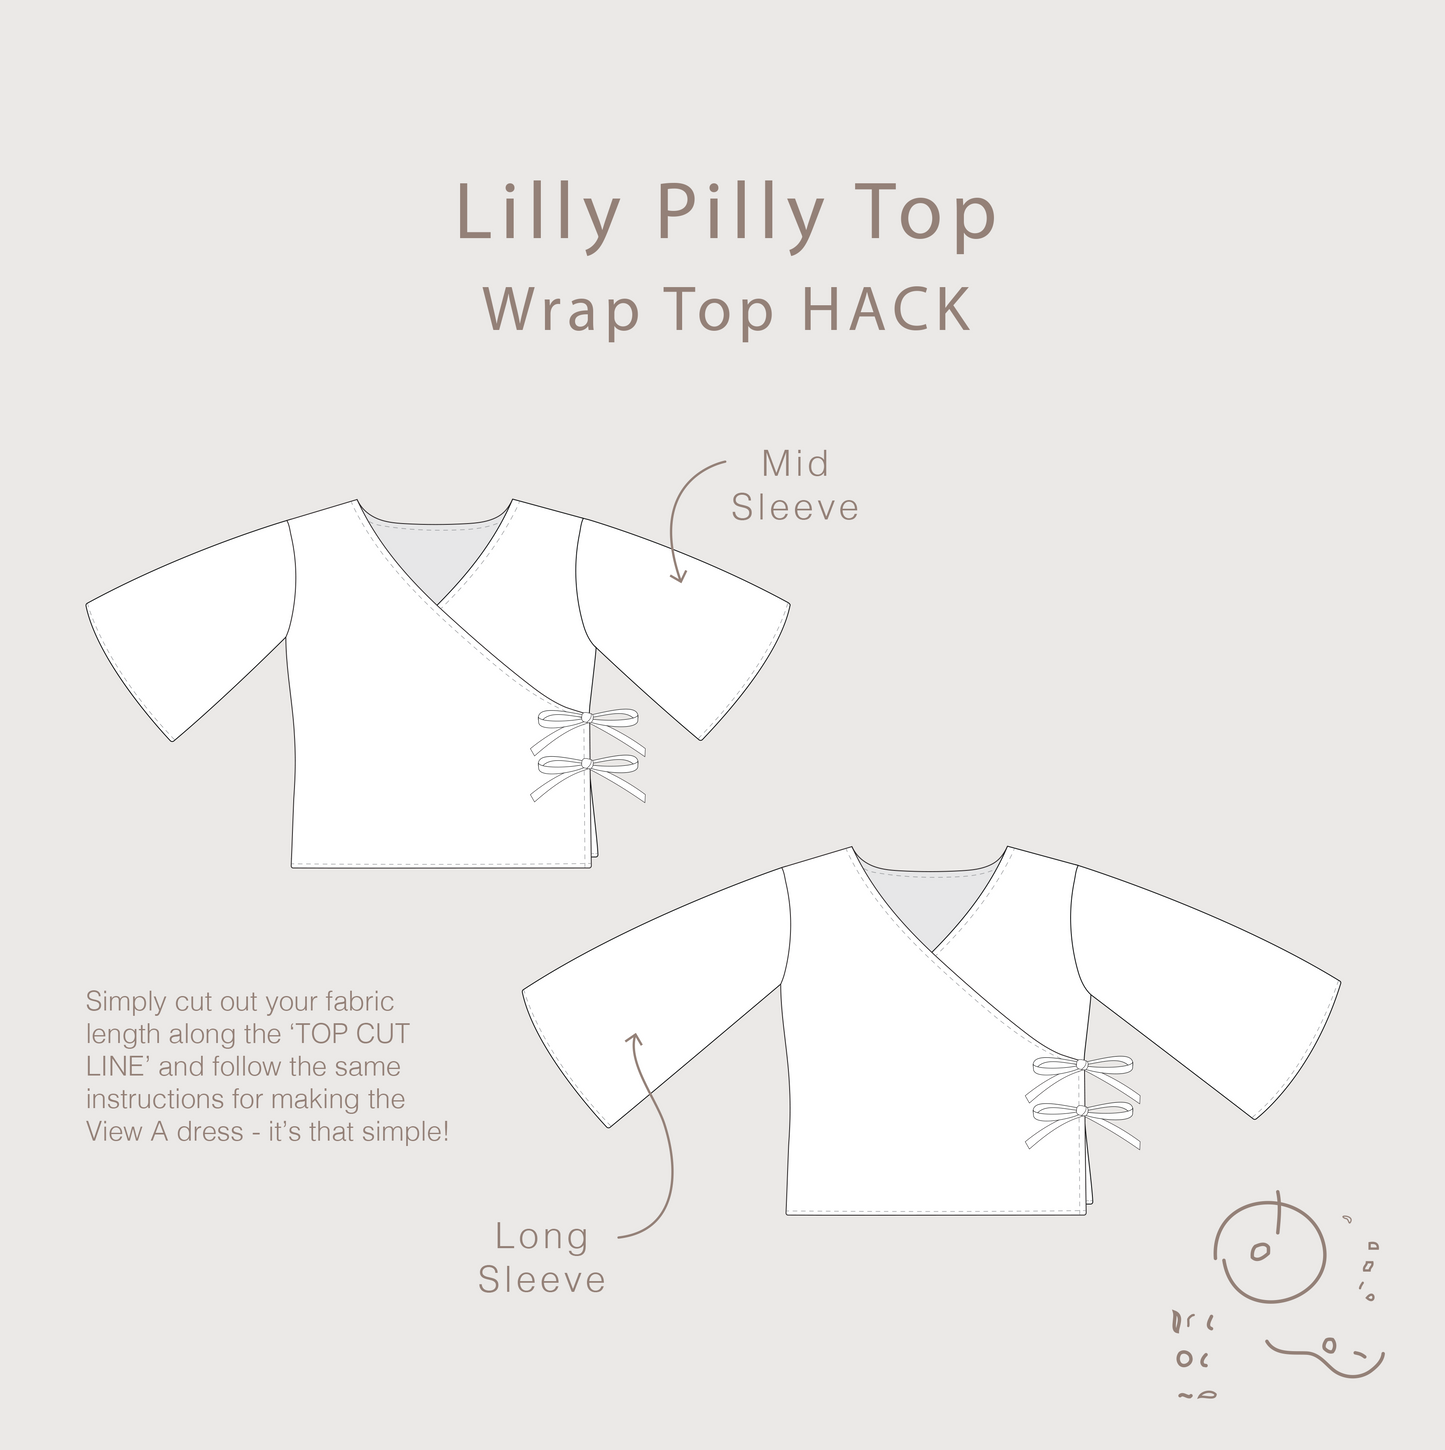 Lilly Pilly Dress + Top PAPER Pattern